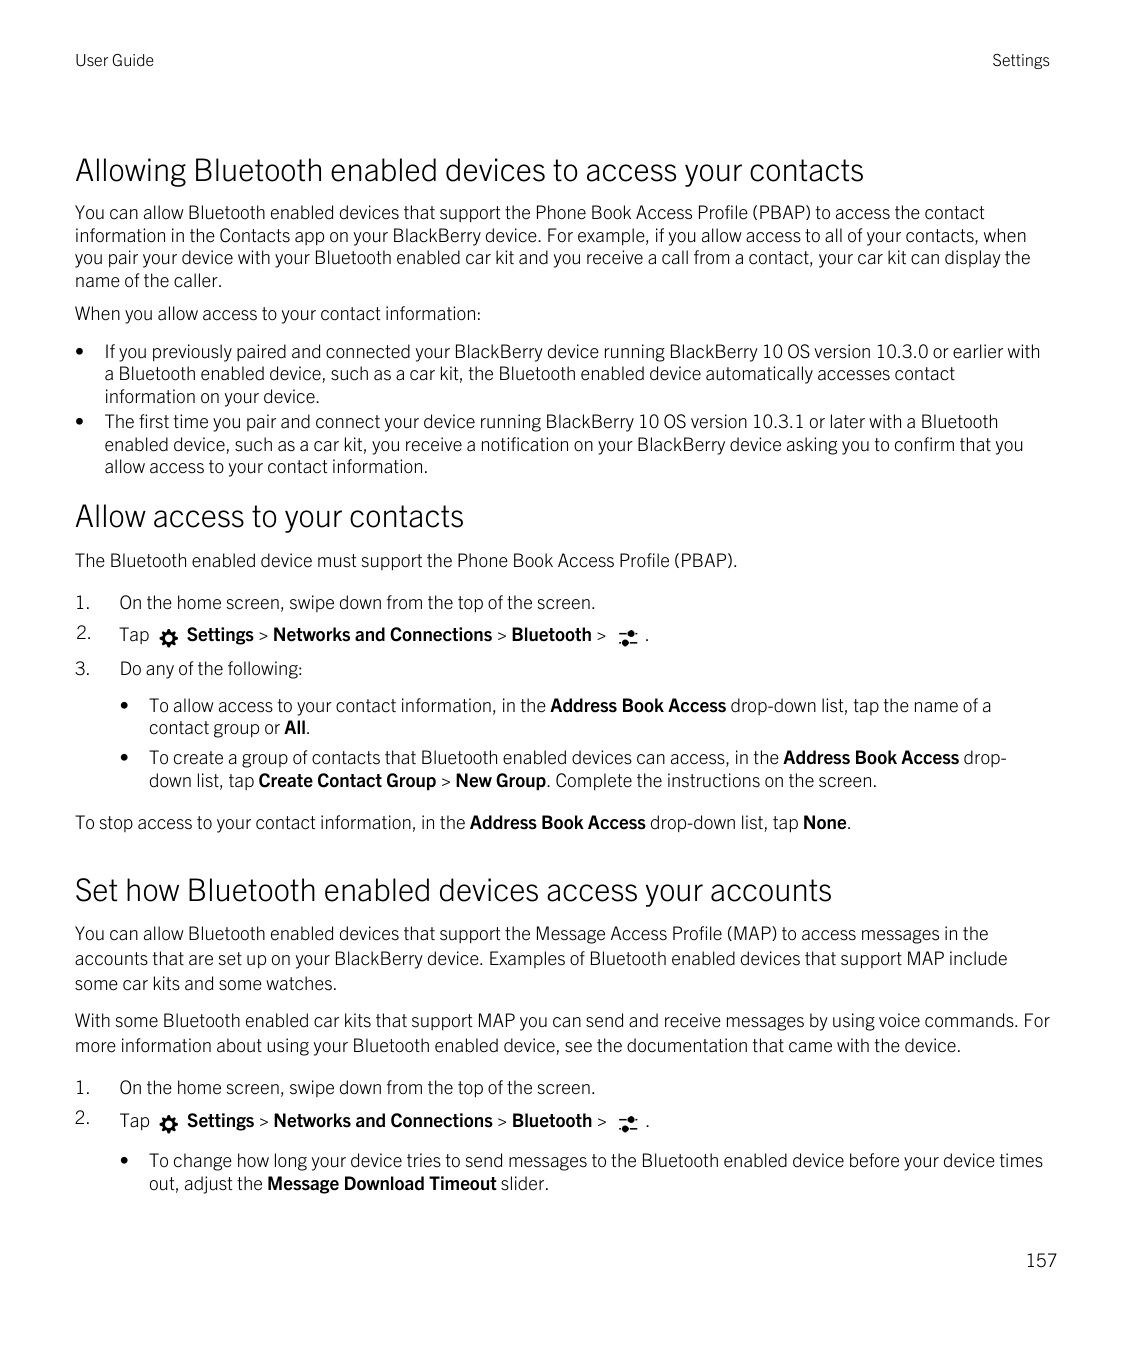 User GuideSettingsAllowing Bluetooth enabled devices to access your contactsYou can allow Bluetooth enabled devices that support